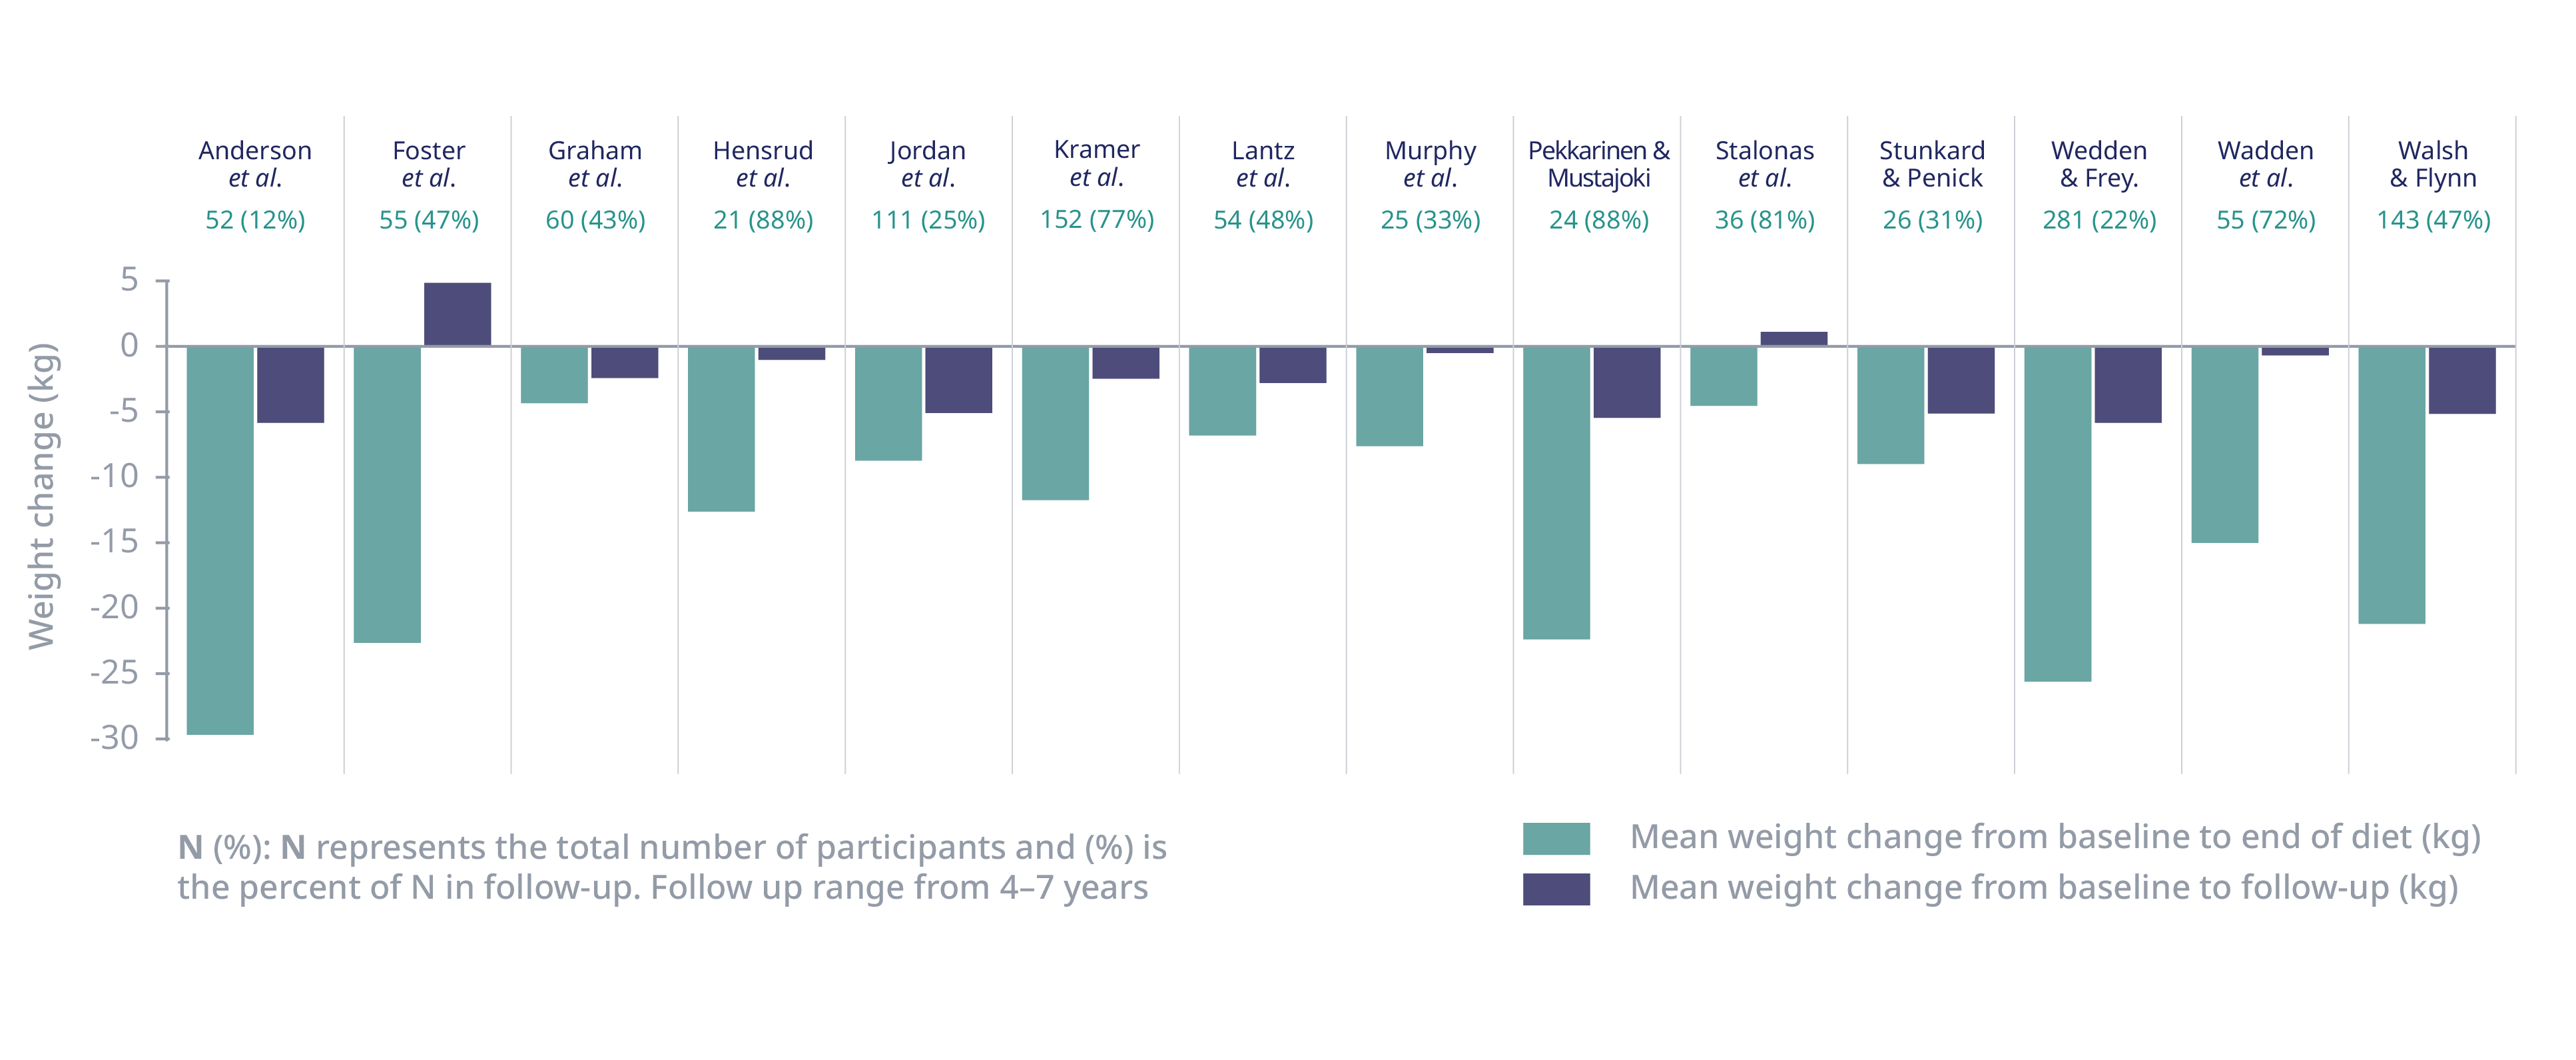 Infographic showing mean weight change of diets.